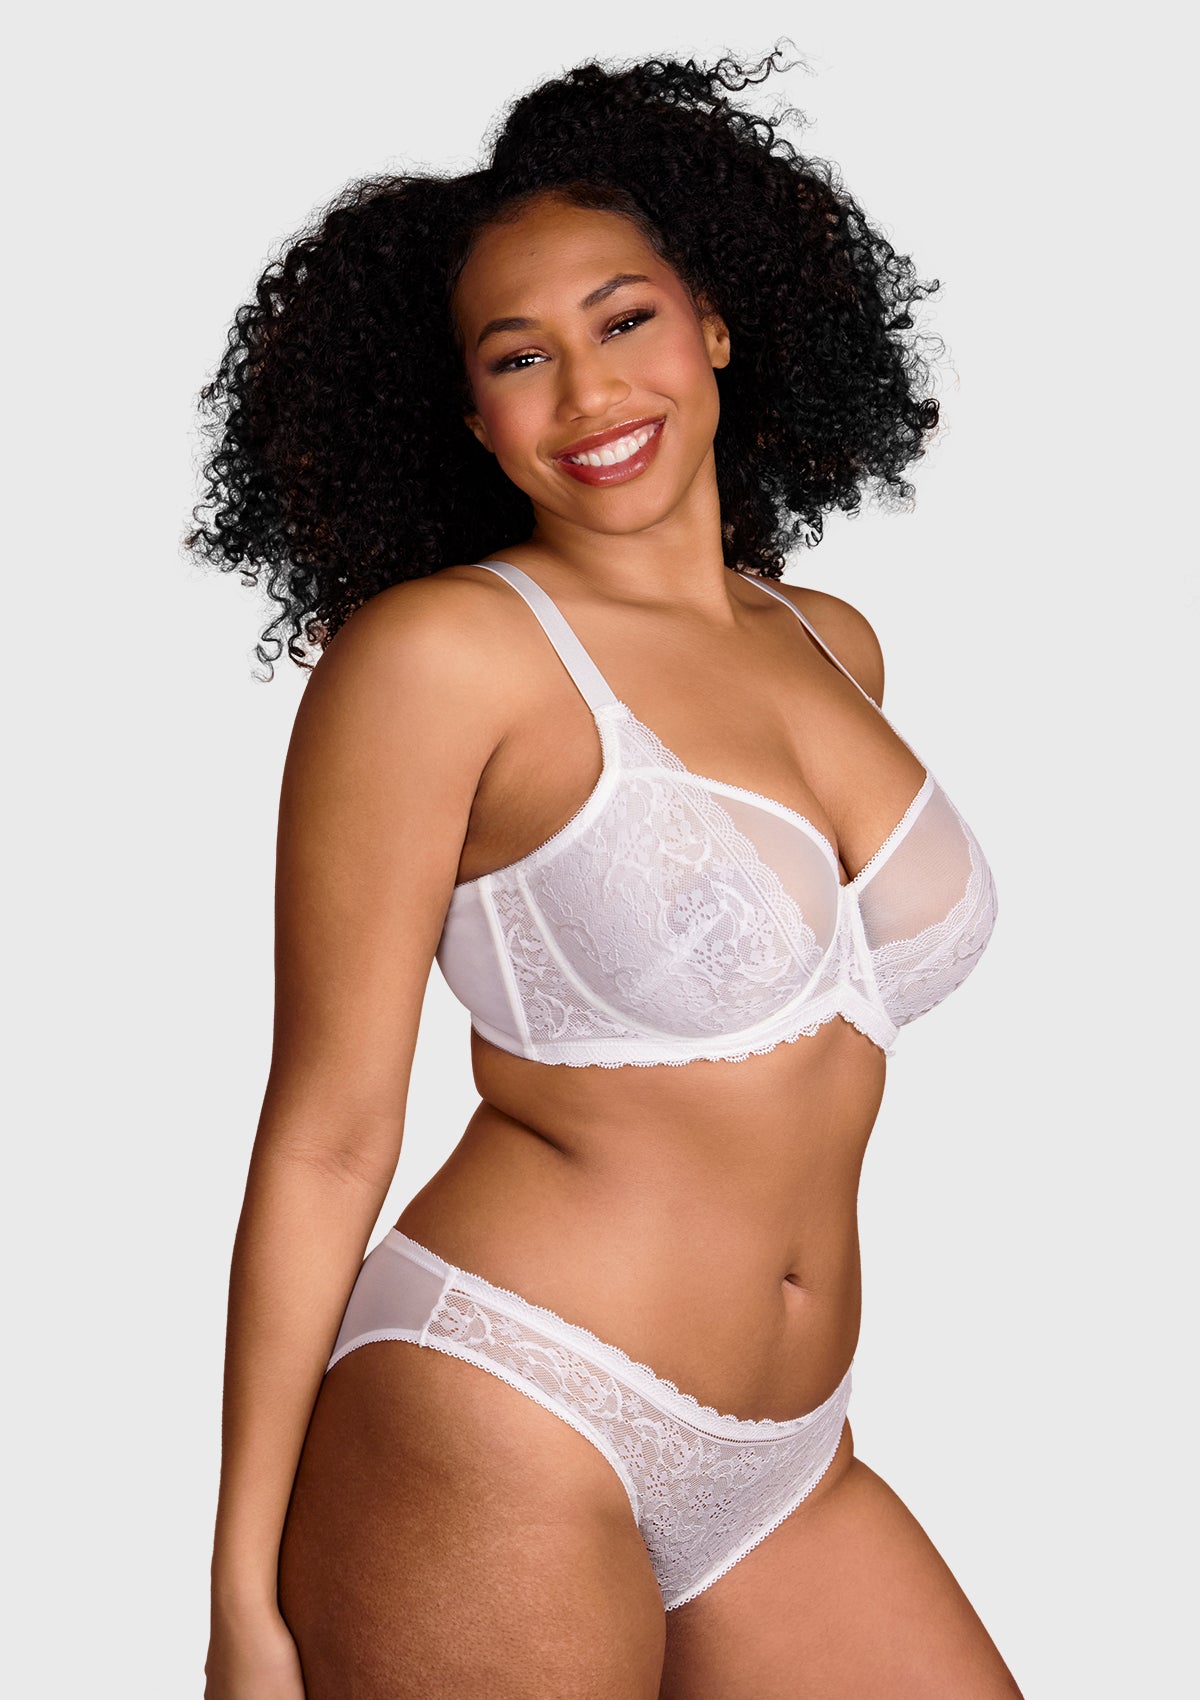 HSIA Anemone Big Bra: Best Bra For Lift And Support, Floral Bra - Light Blue / 40 / DDD/F